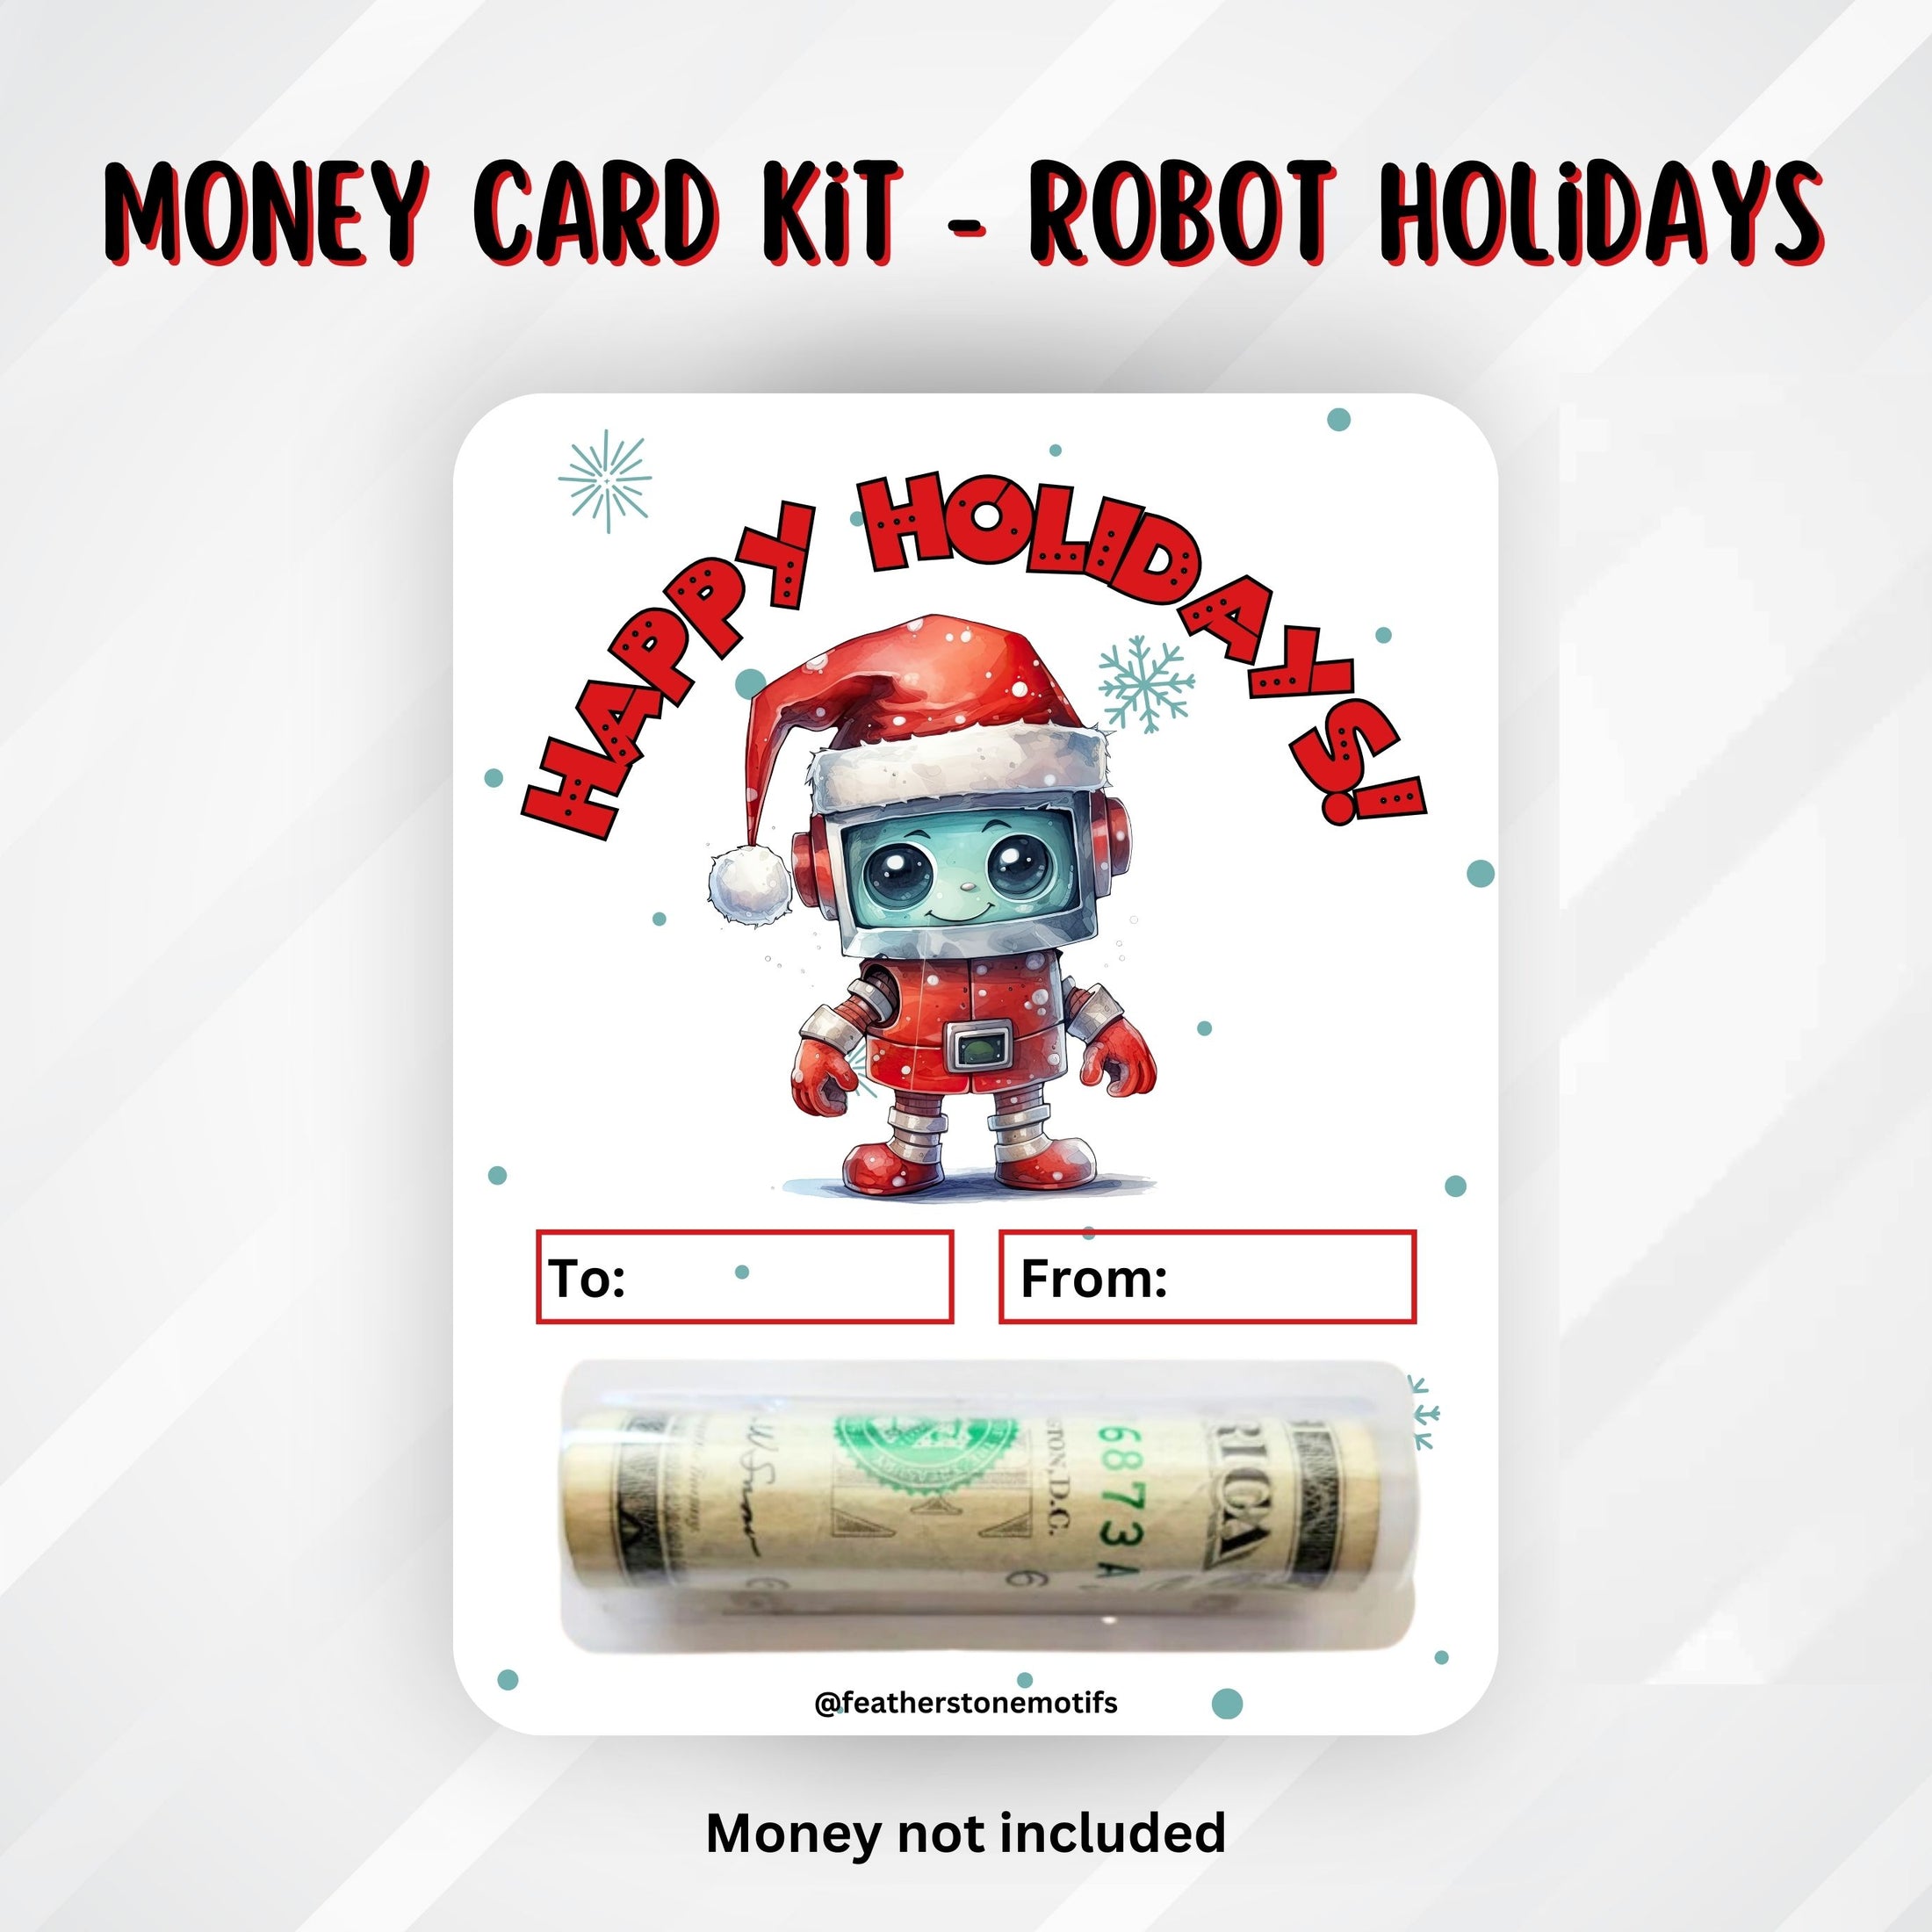 This image shows the Robot money card with money tube attached.